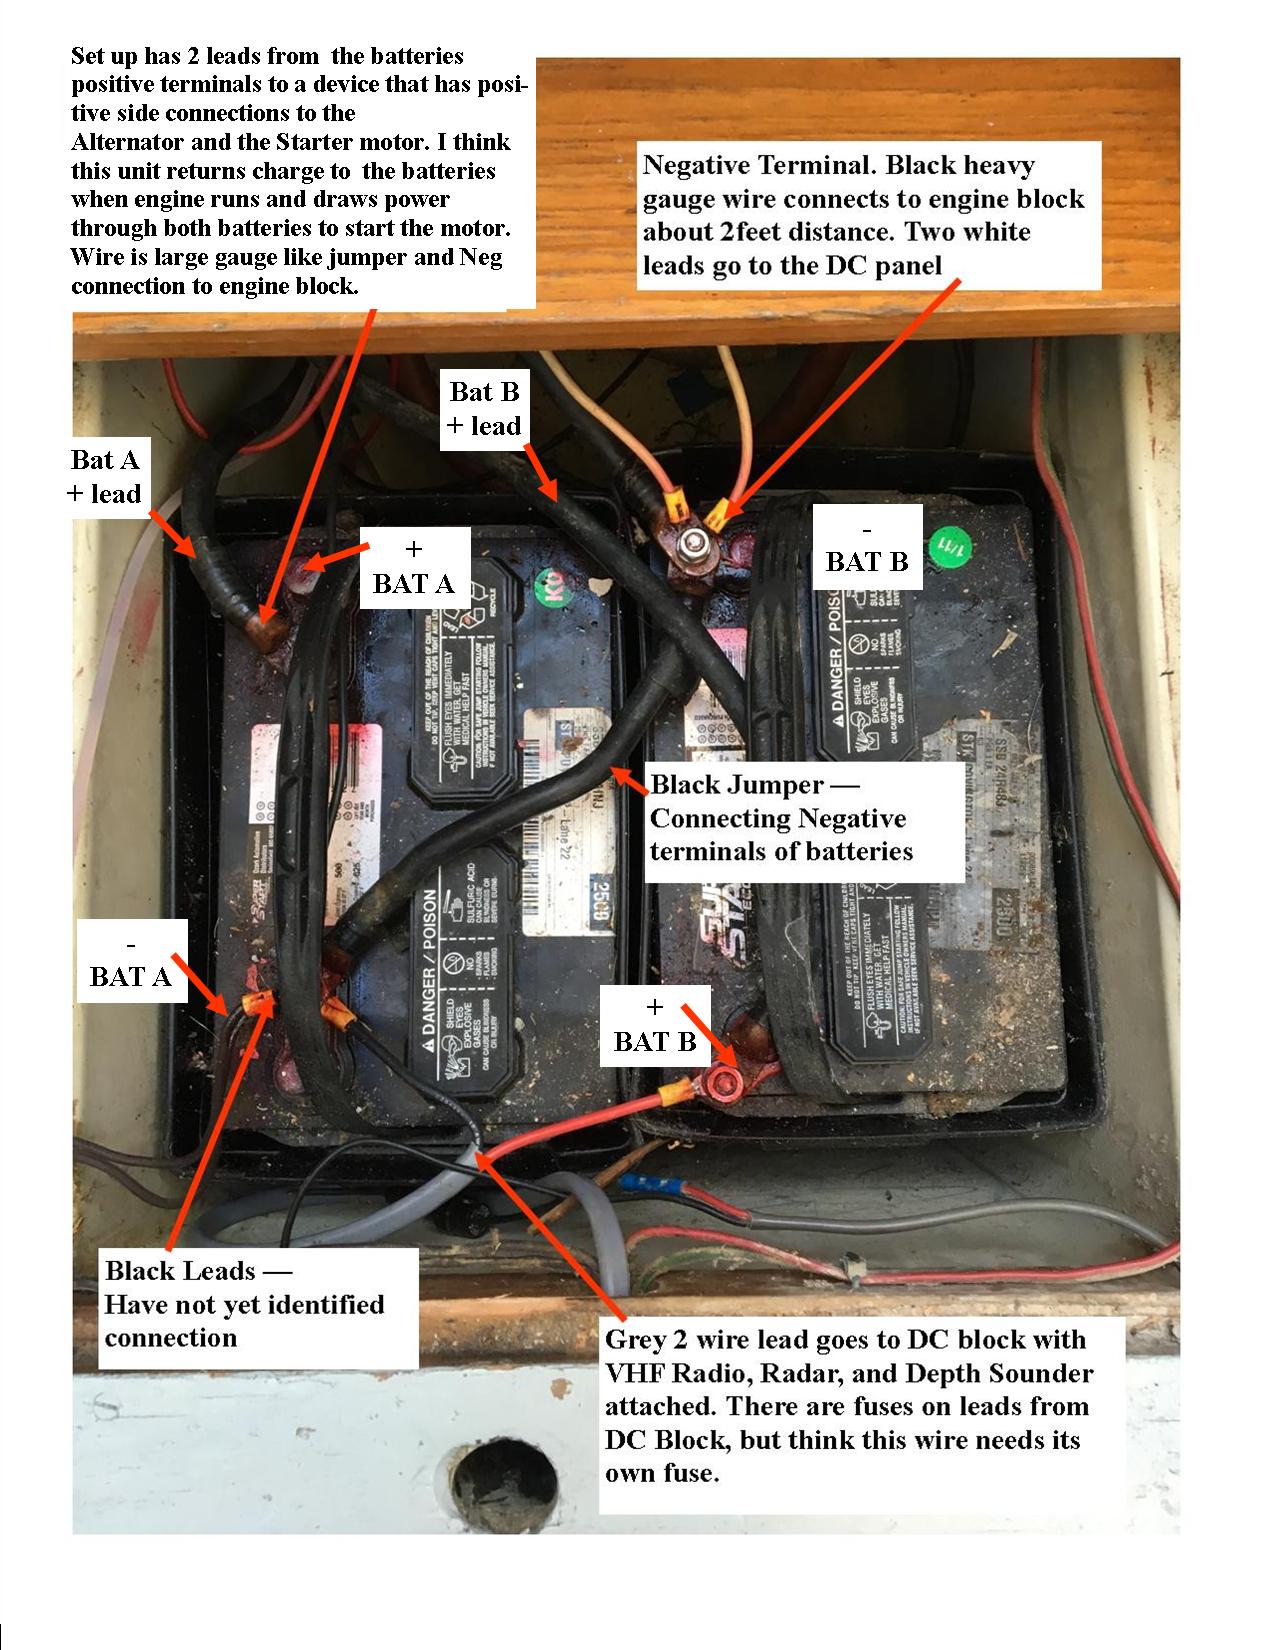 Revised 1974 Battery Connections CAL35C.jpg